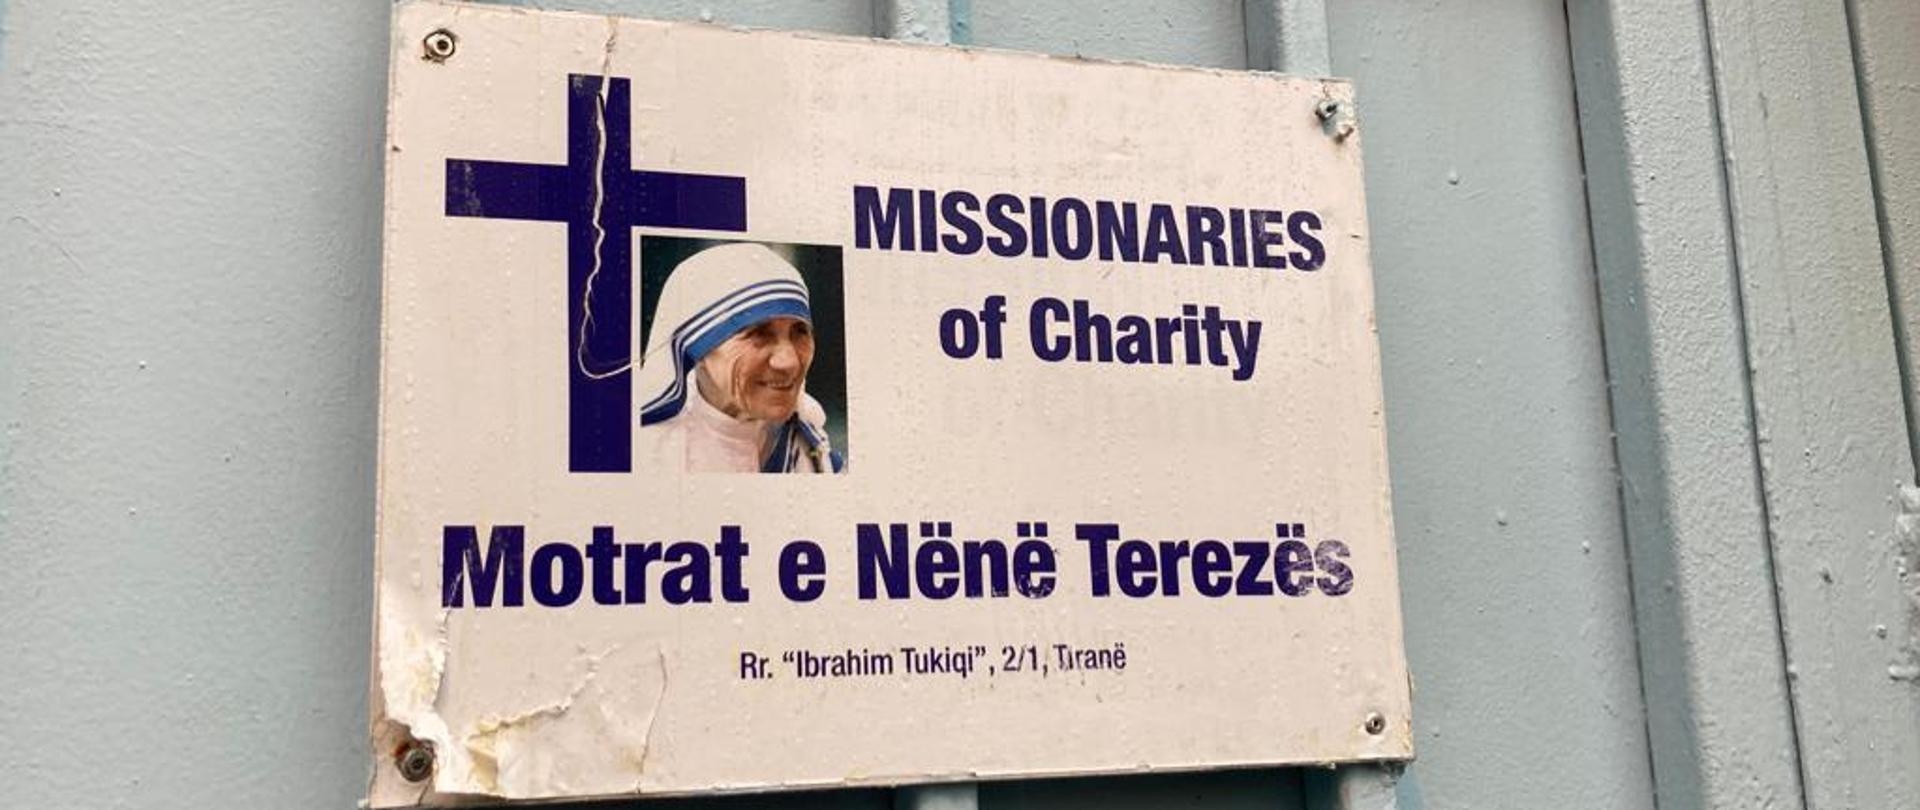 Missionaries of Charity in Tirana